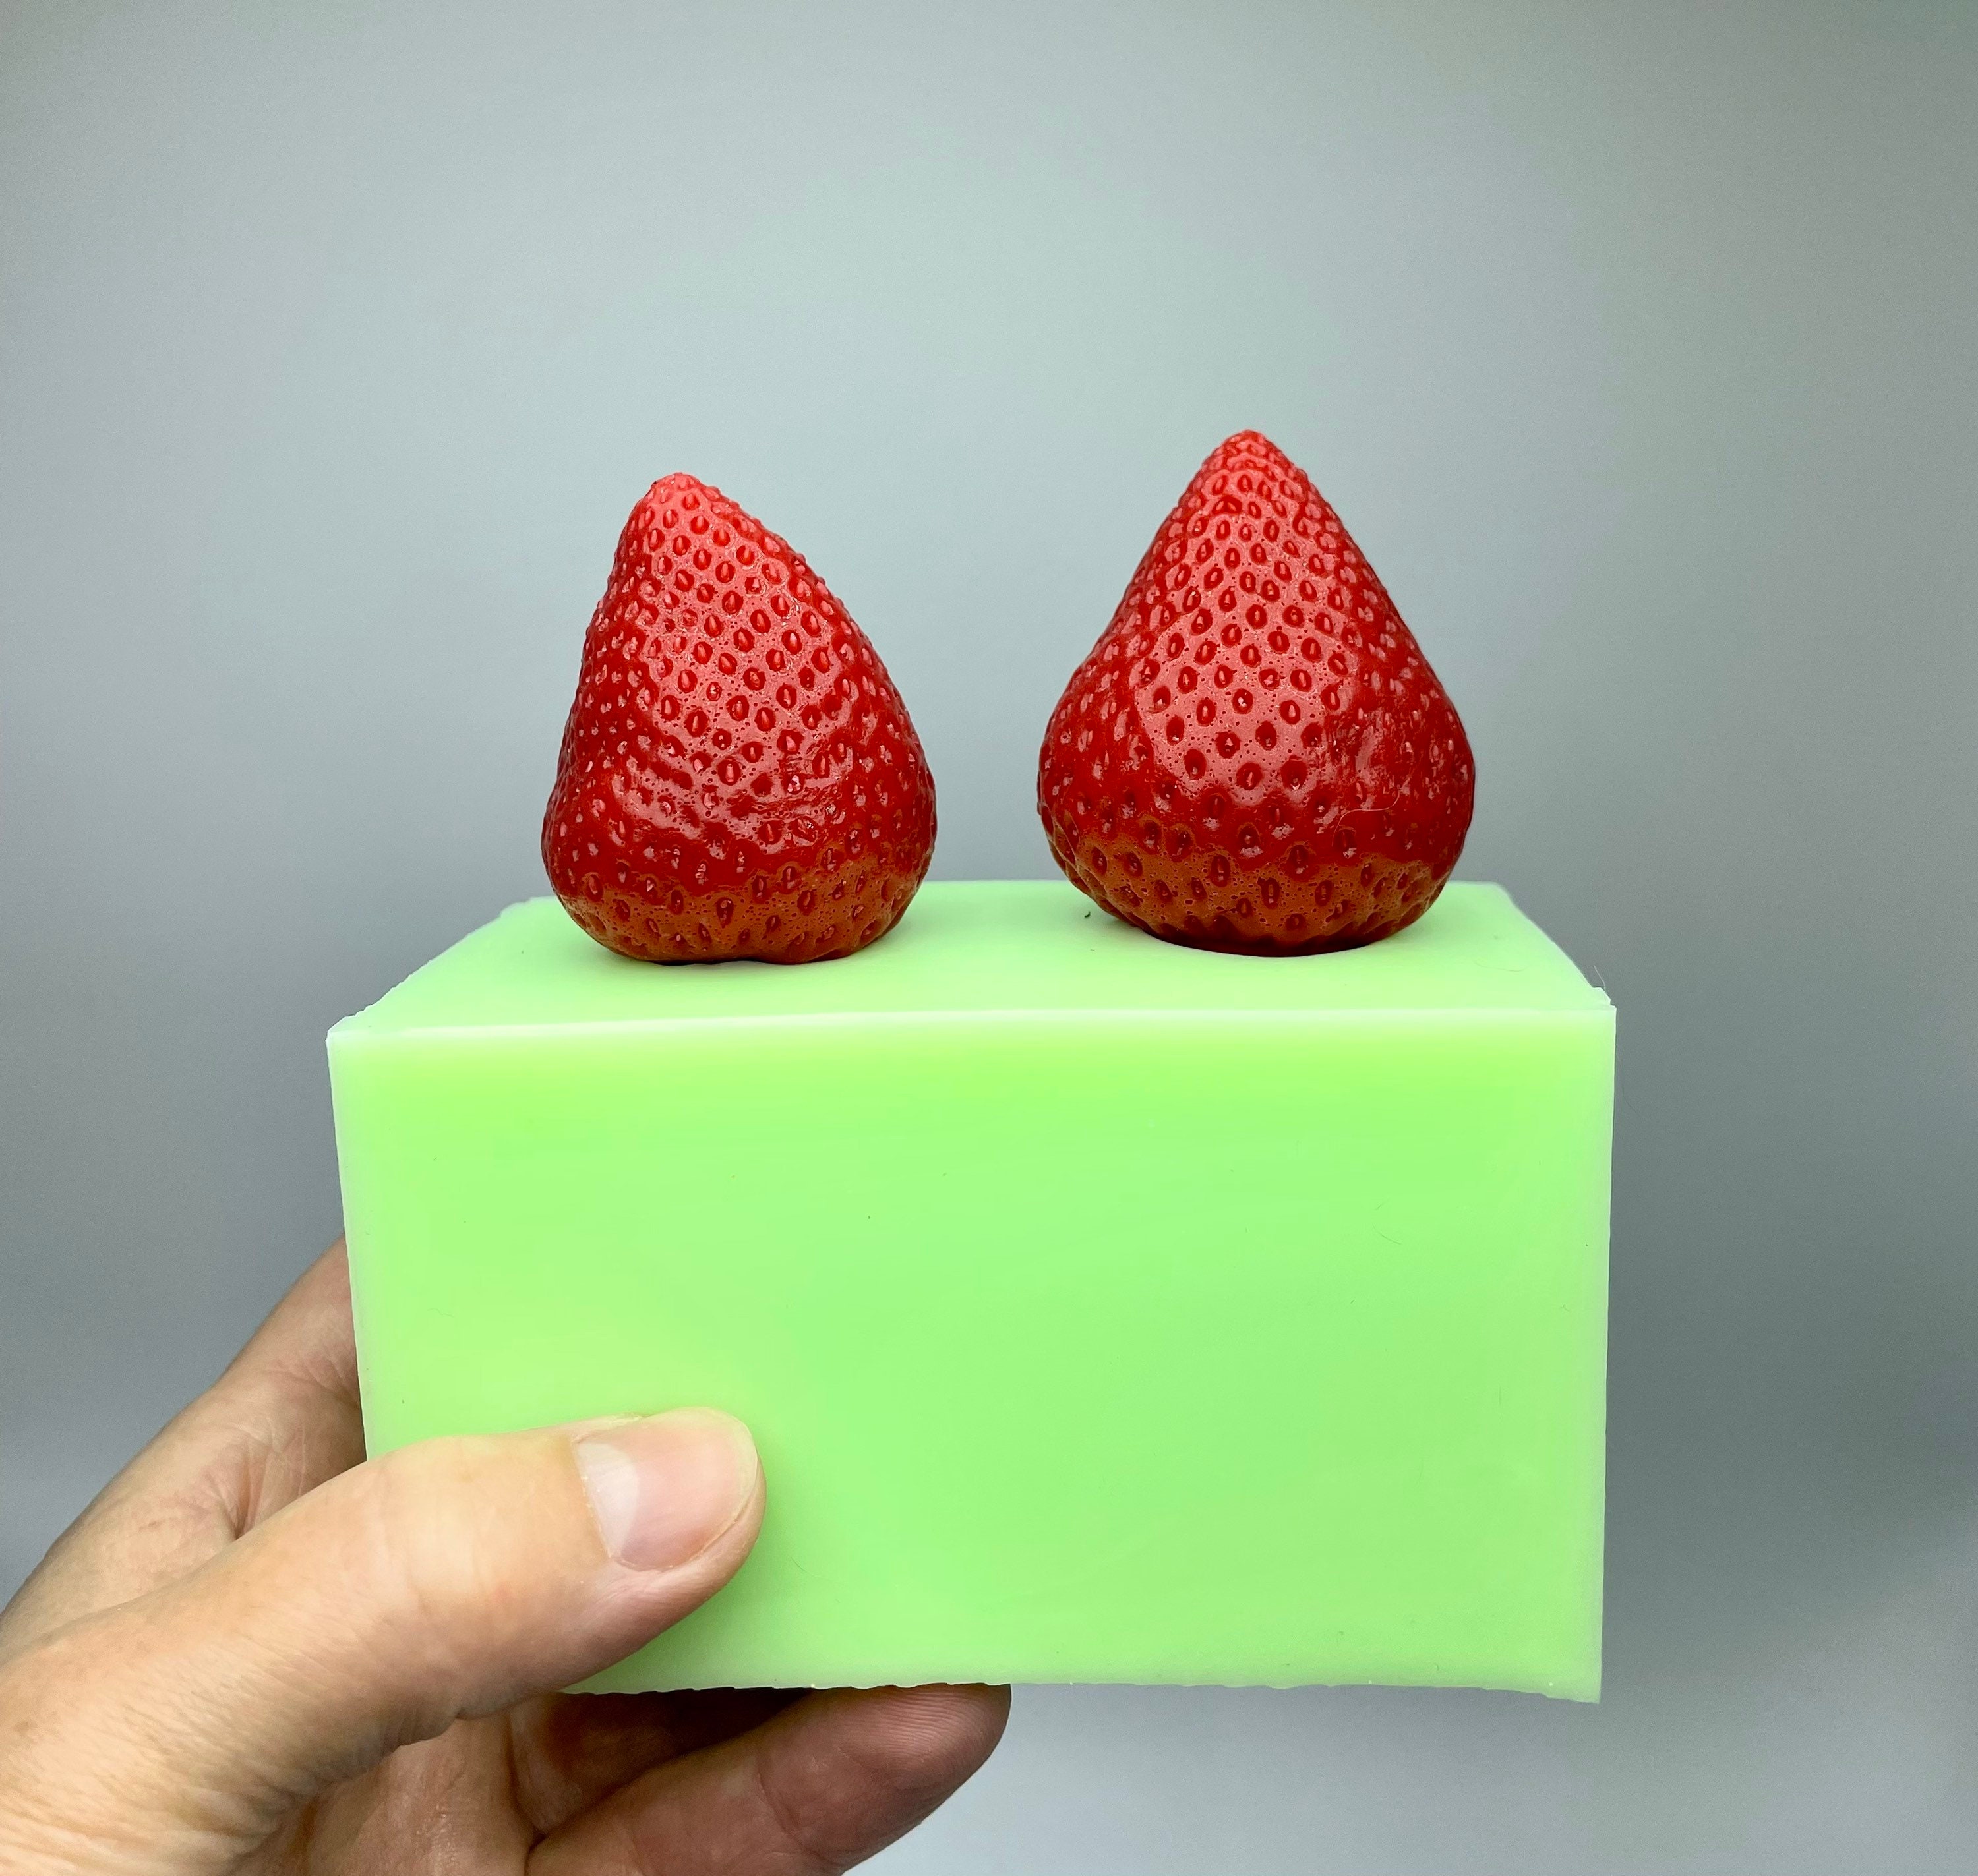 TUTTIFRUTTI Fragola / Strawberry by Pavoni - 3D Silicone Mold - 20 Forms